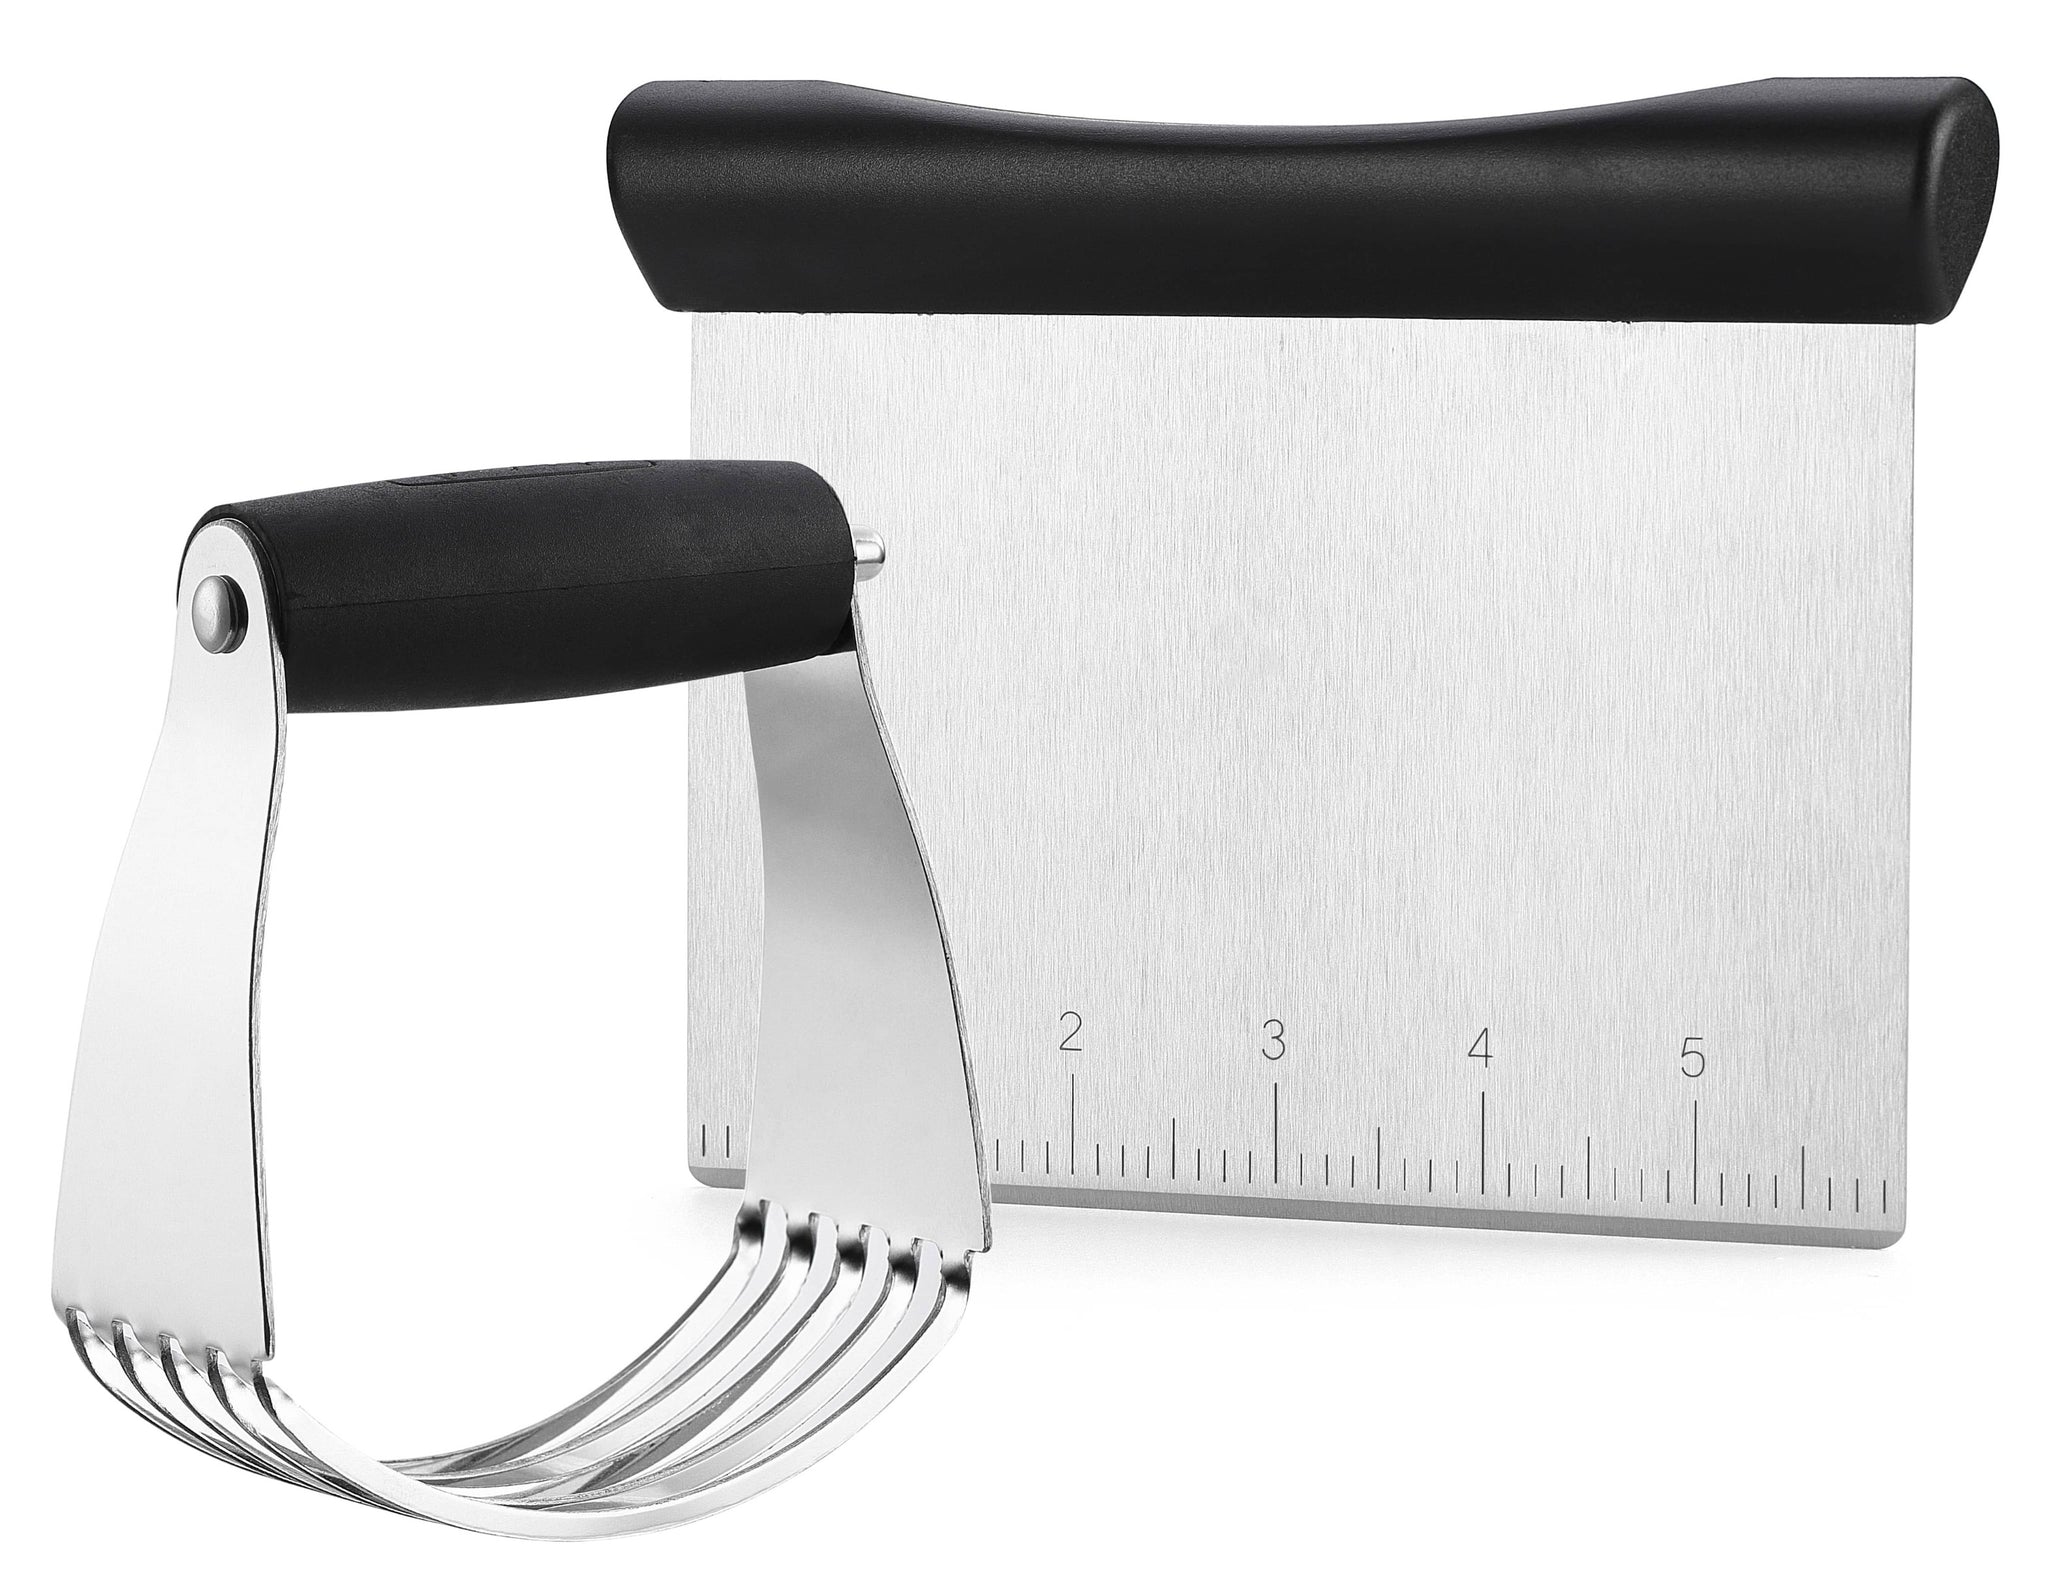 Choice 8 1/2 x 4 3/4 Stainless Steel Dough Cutter / Bench Scraper with  Measurements